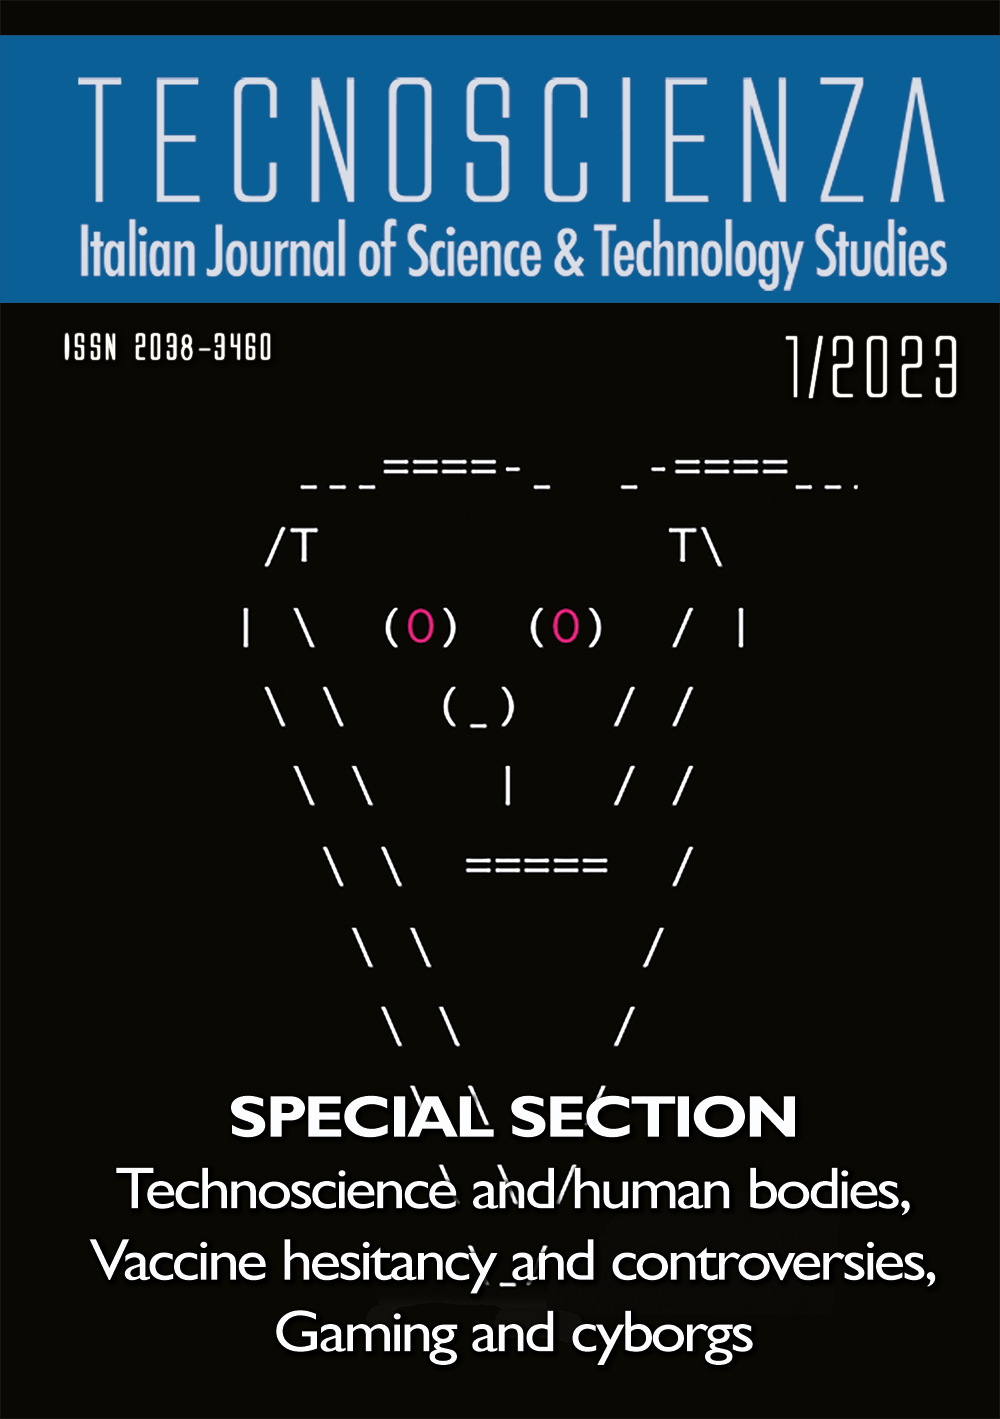 Cover of Tecnoscienza number 27 (1st Issue, Year 2023)